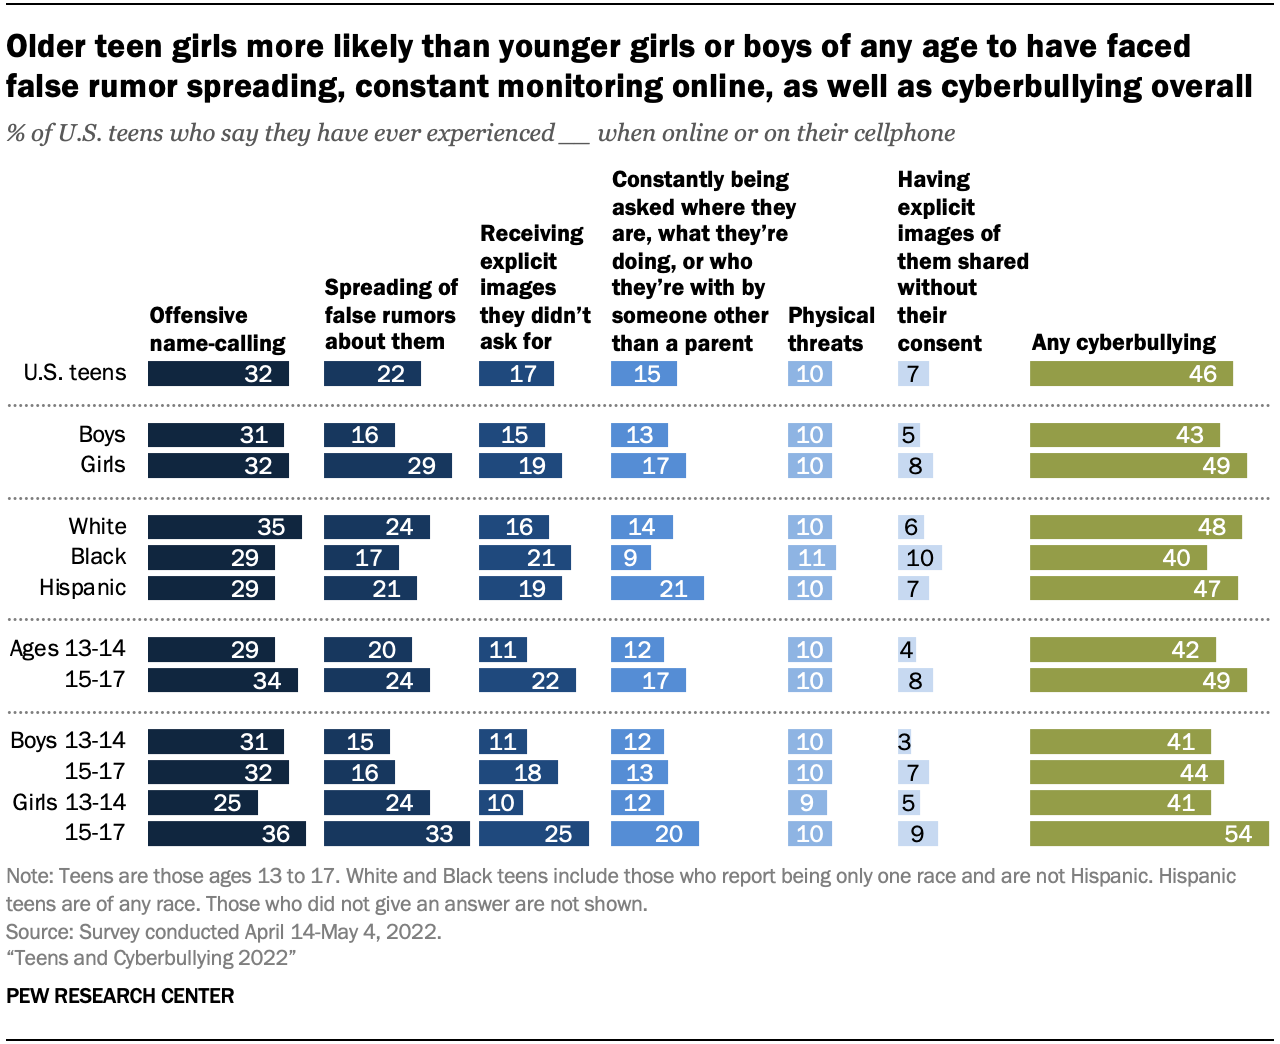 A bar chart showing that older teen girls more likely than younger girls or boys of any age to have faced false rumor spreading constant monitoring online as well as cyberbullying overall